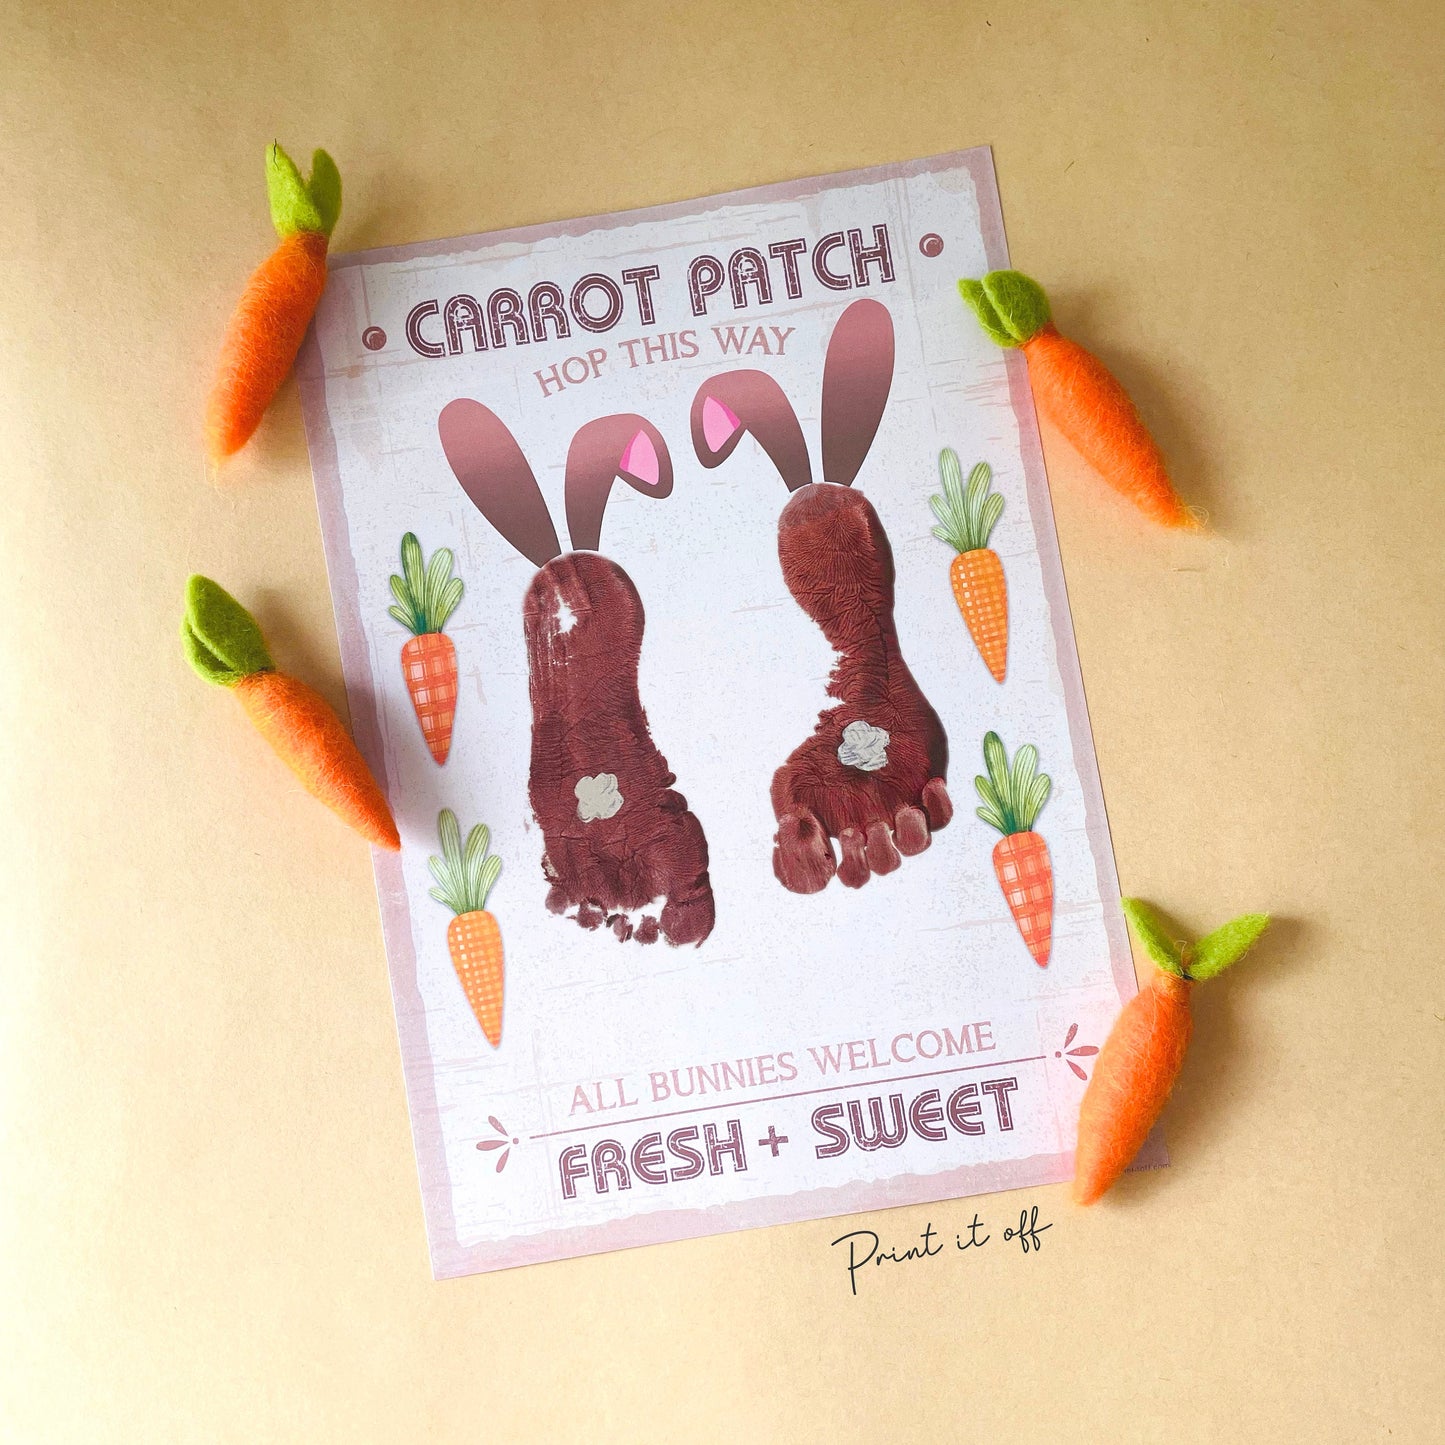 Farm Sign Bunny Easter Carrot Patch / Footprint Feet Art Craft / Kids Baby Toddler / Activity Gift Card Decor Sign / PRINT IT OFF 0458